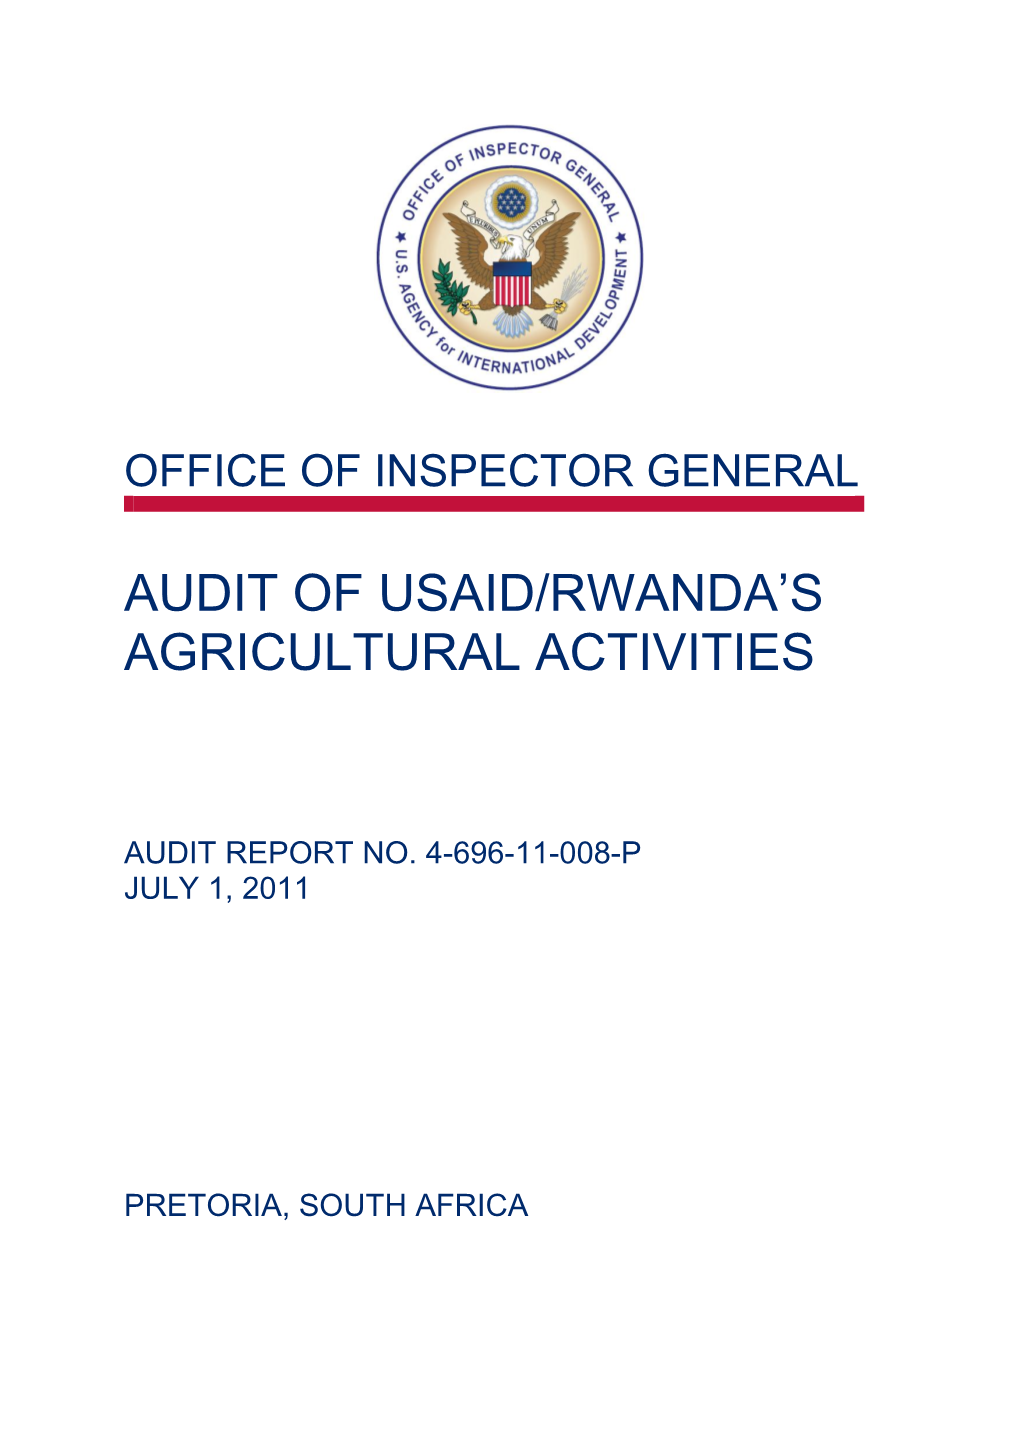 Audit of USAID/Rwanda's Agricultural Activities